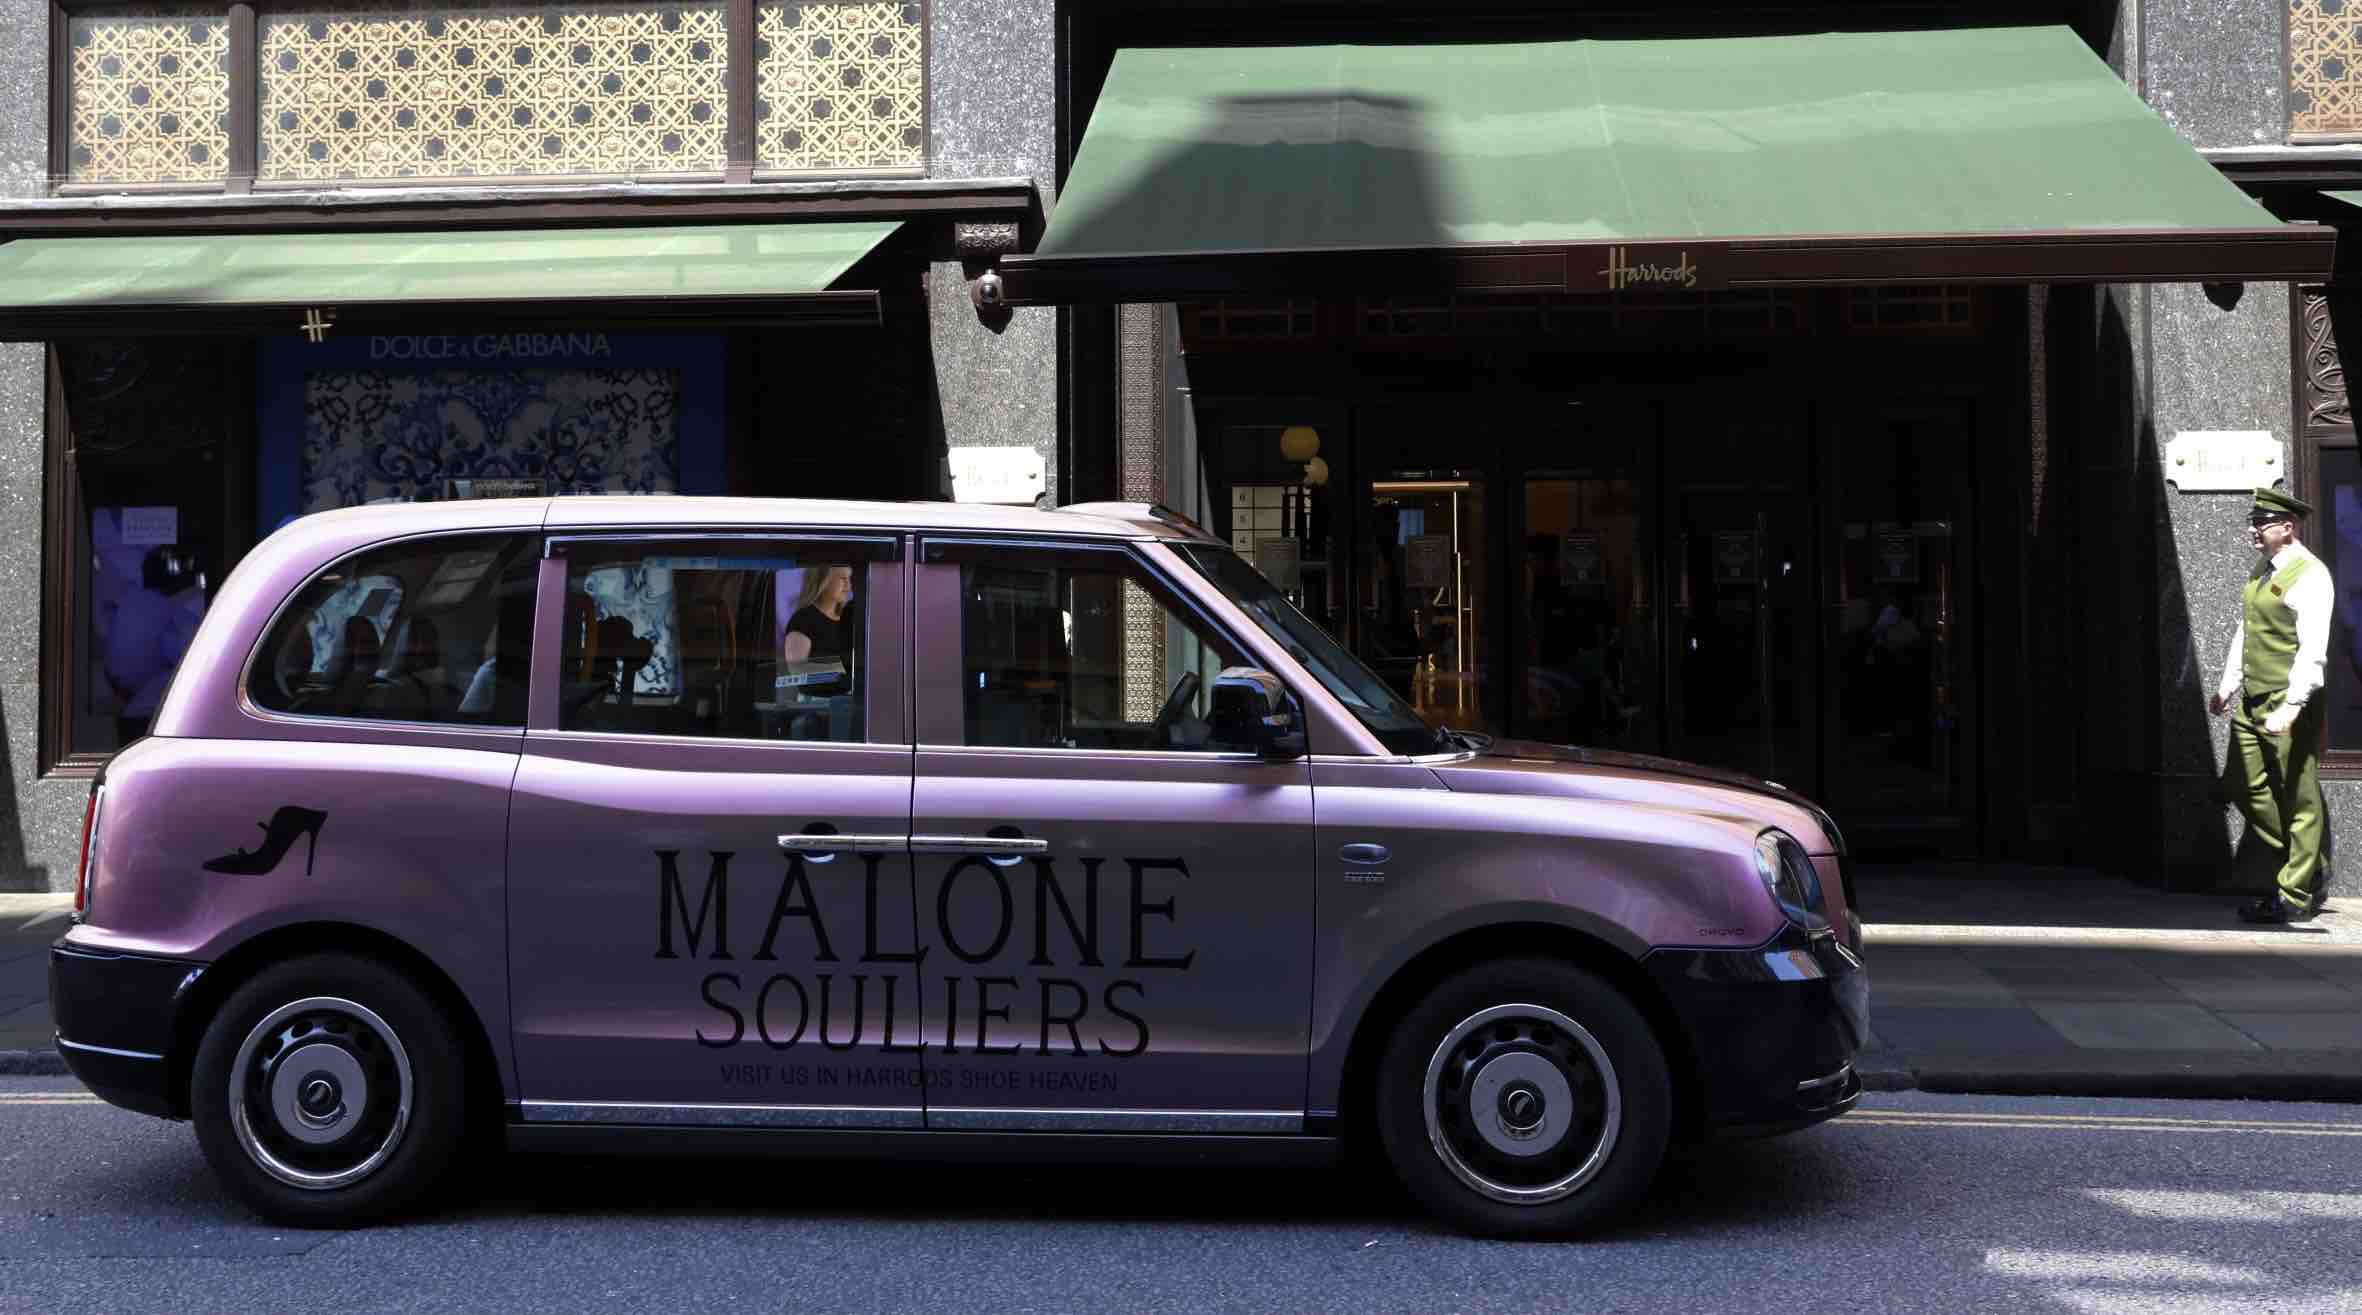 Malone Souliers taxi campaign.